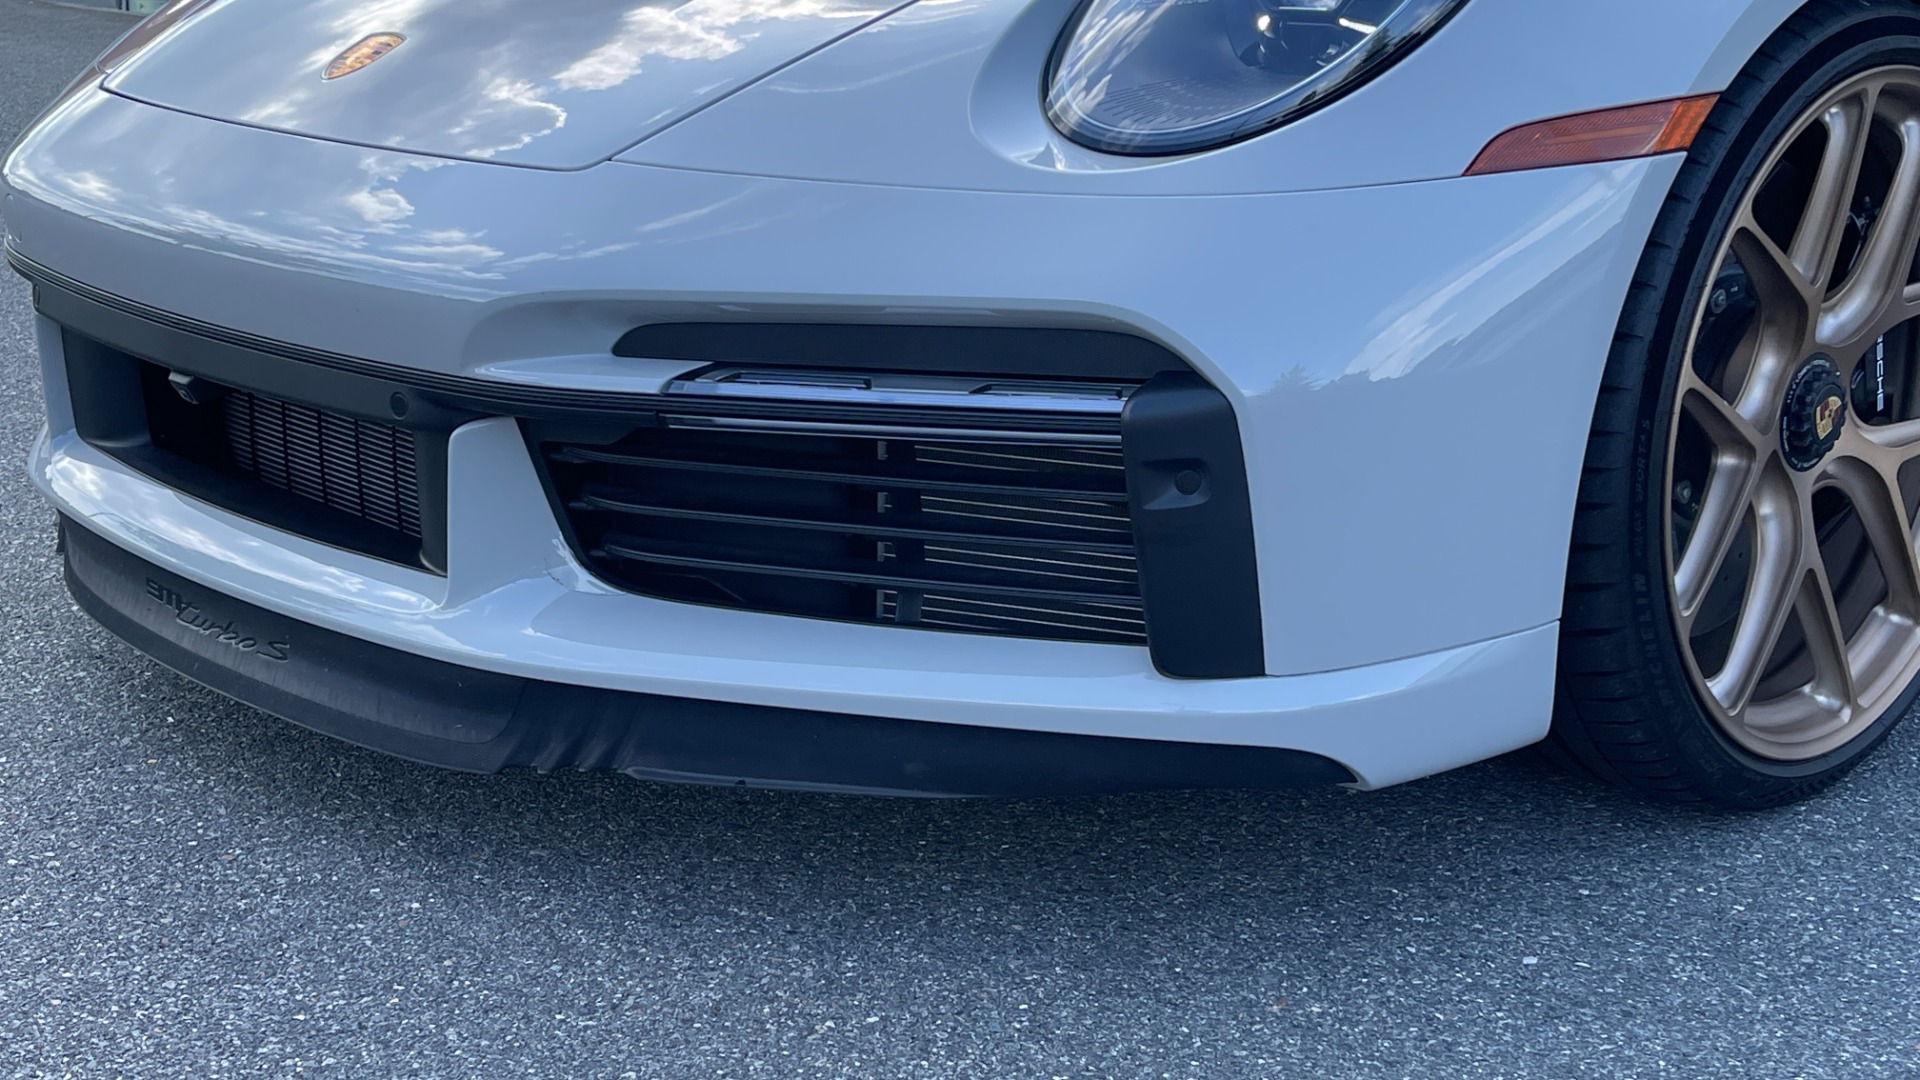 Used 2021 Porsche 911 Turbo S / HRE WHEELS / FRONT LIFT / MATRIX LIGHTS / PASM SUSPENSION for sale $279,000 at Formula Imports in Charlotte NC 28227 12